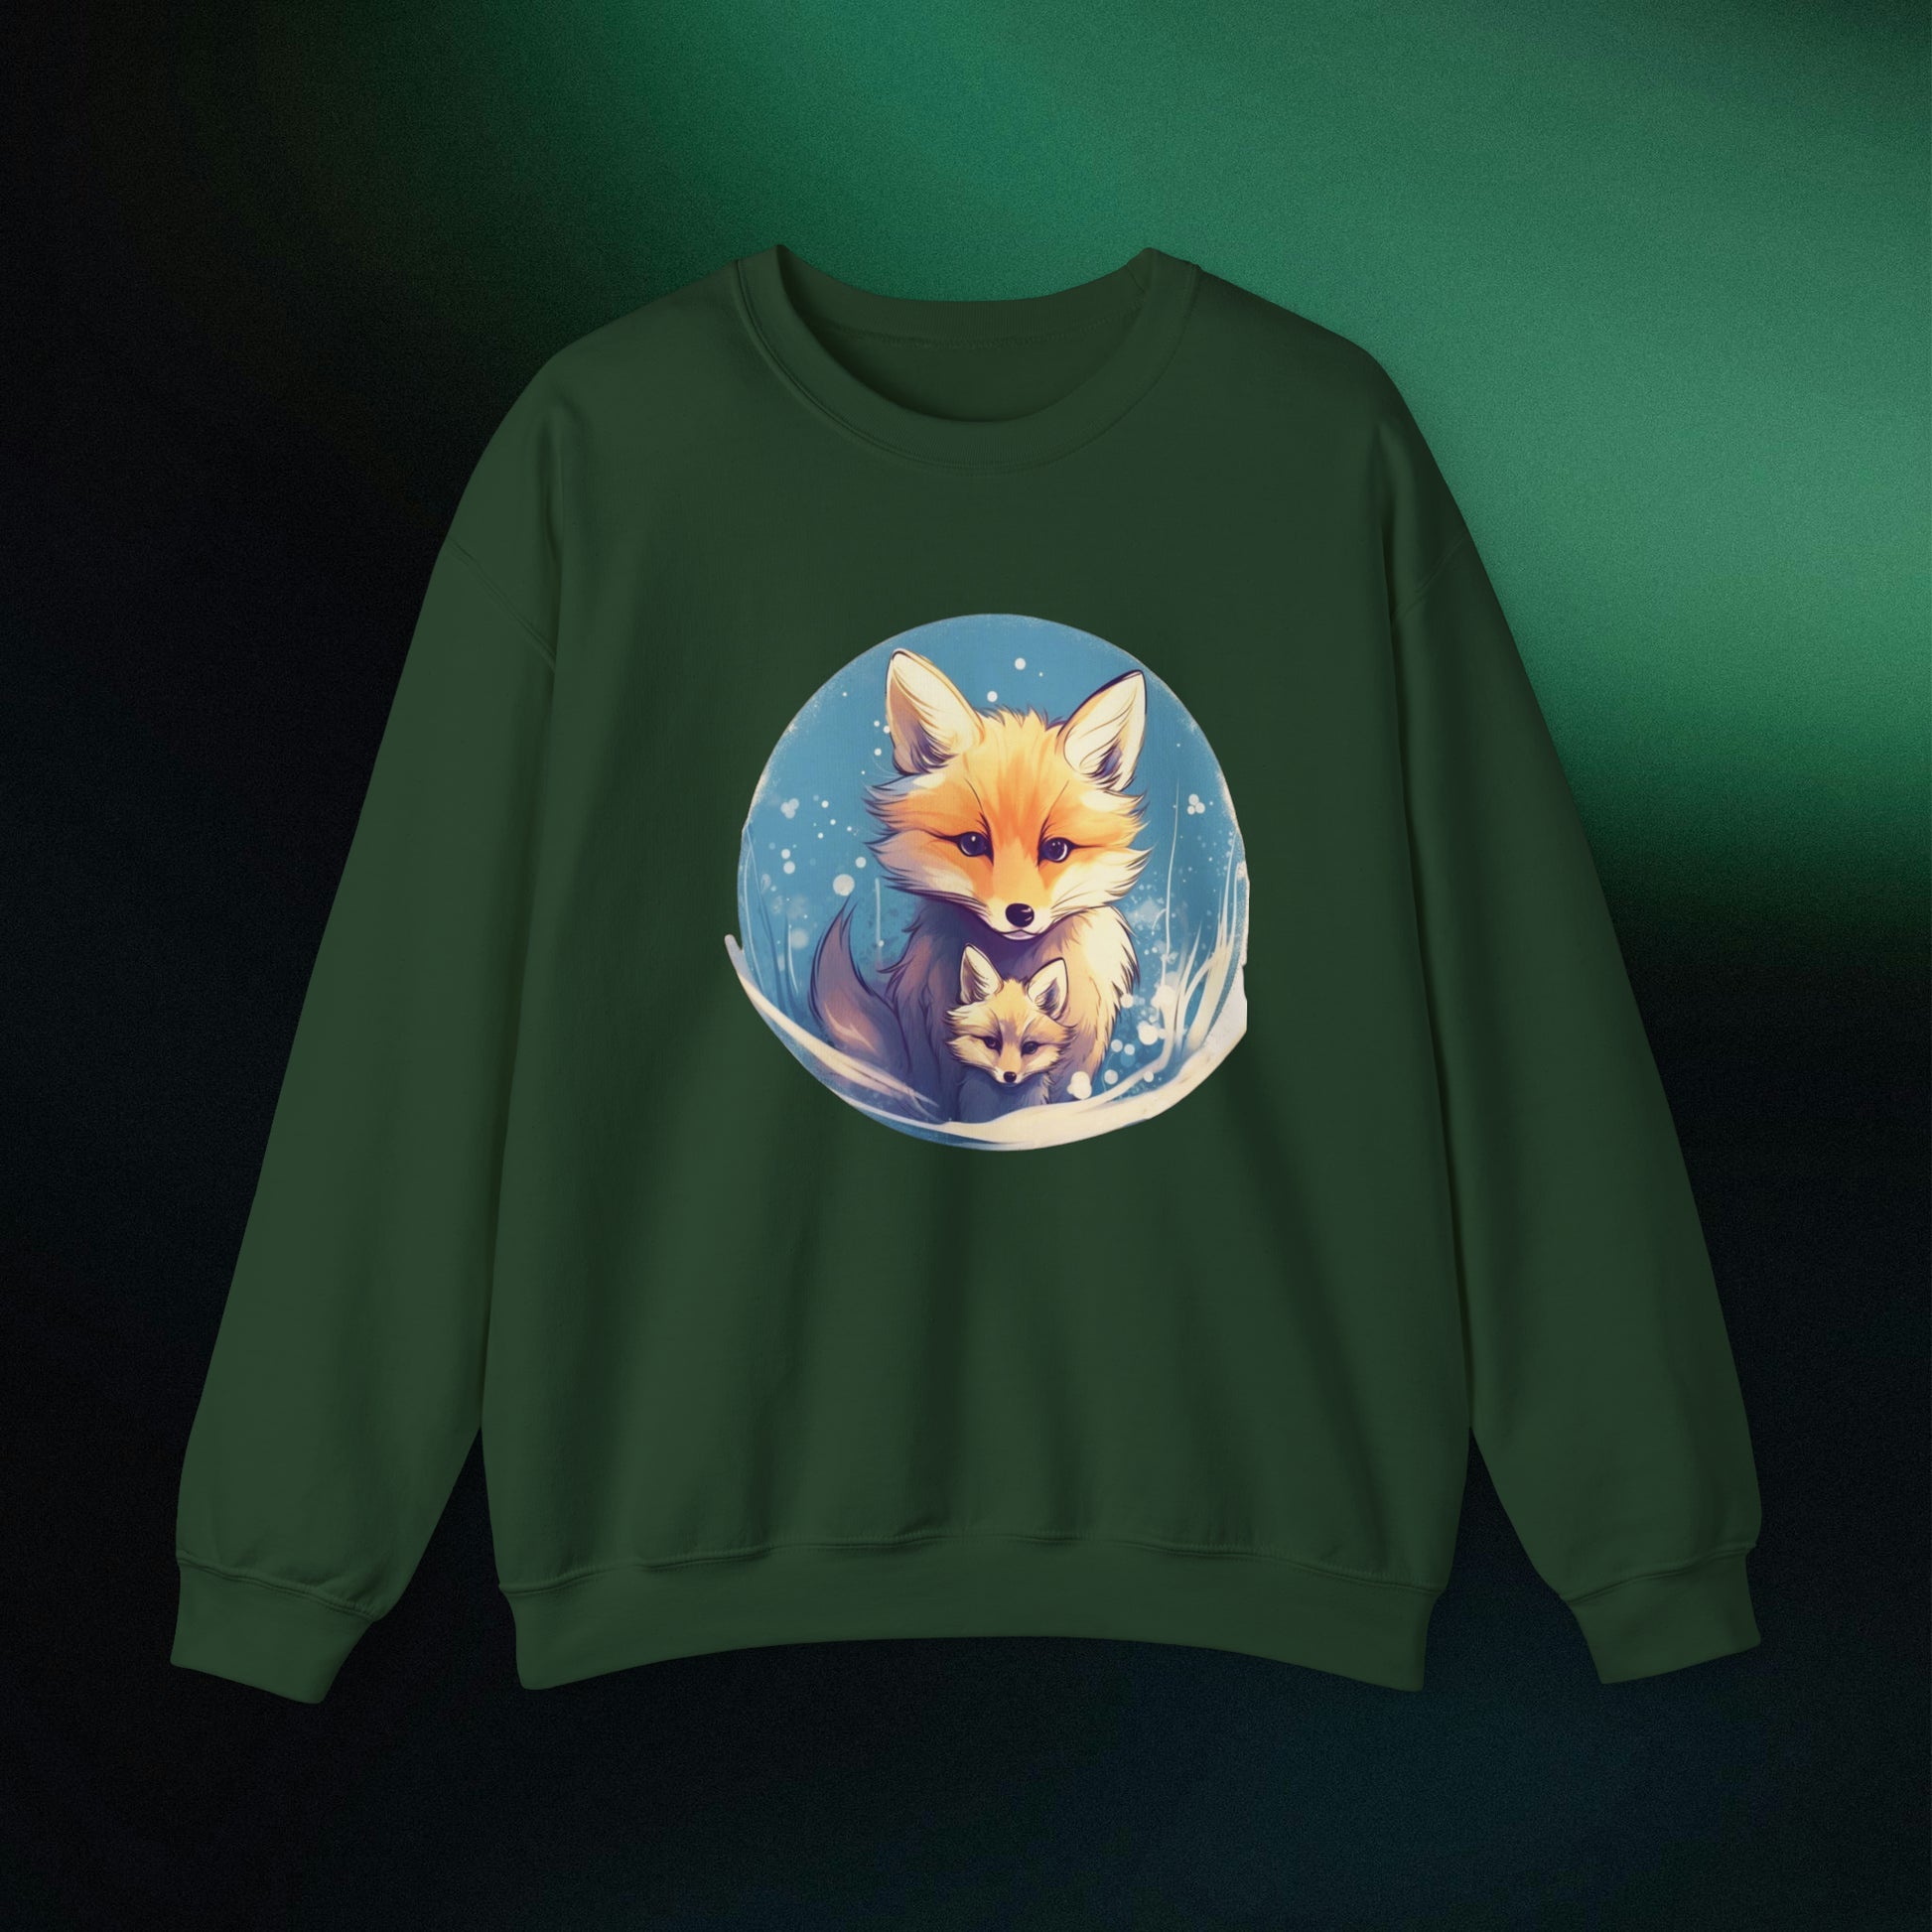 Vintage Forest Witch Aesthetic Sweatshirt - Cozy Fox Cottagecore Sweater with Mommy and Baby Fox Design Sweatshirt S Forest Green 